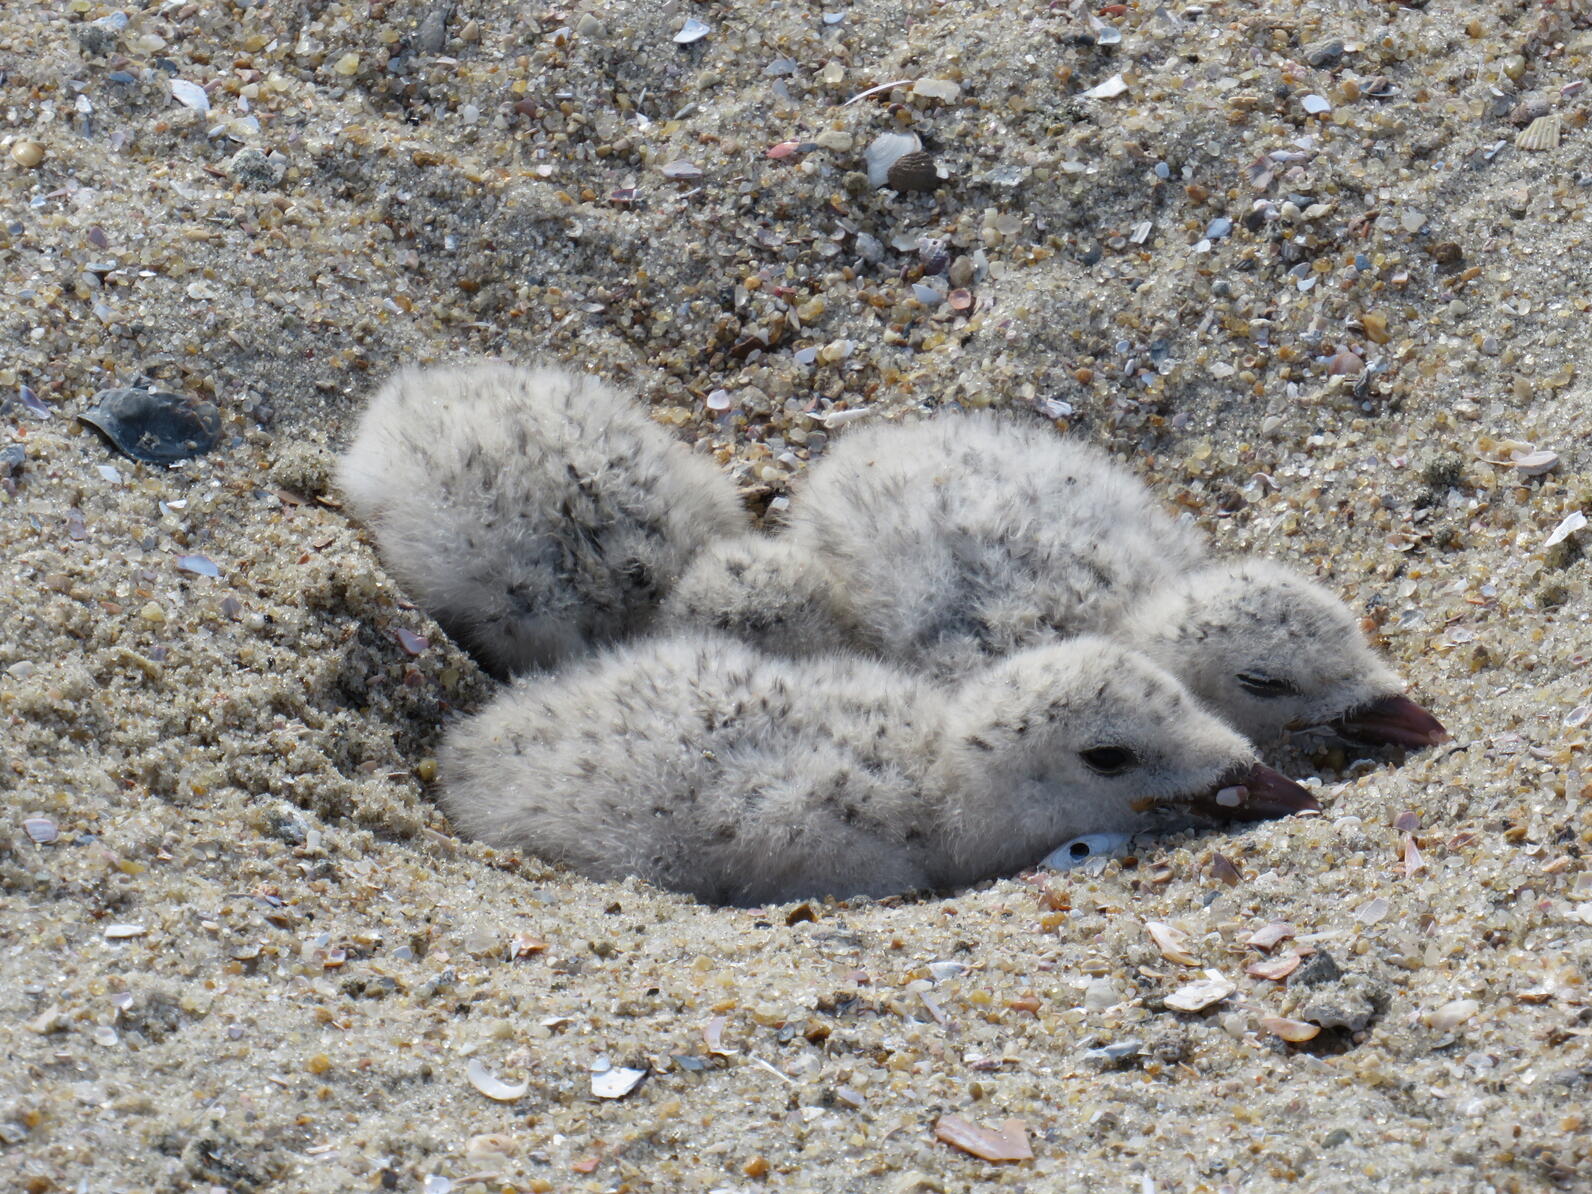 A pair of young birds lay in their nest in the sand.